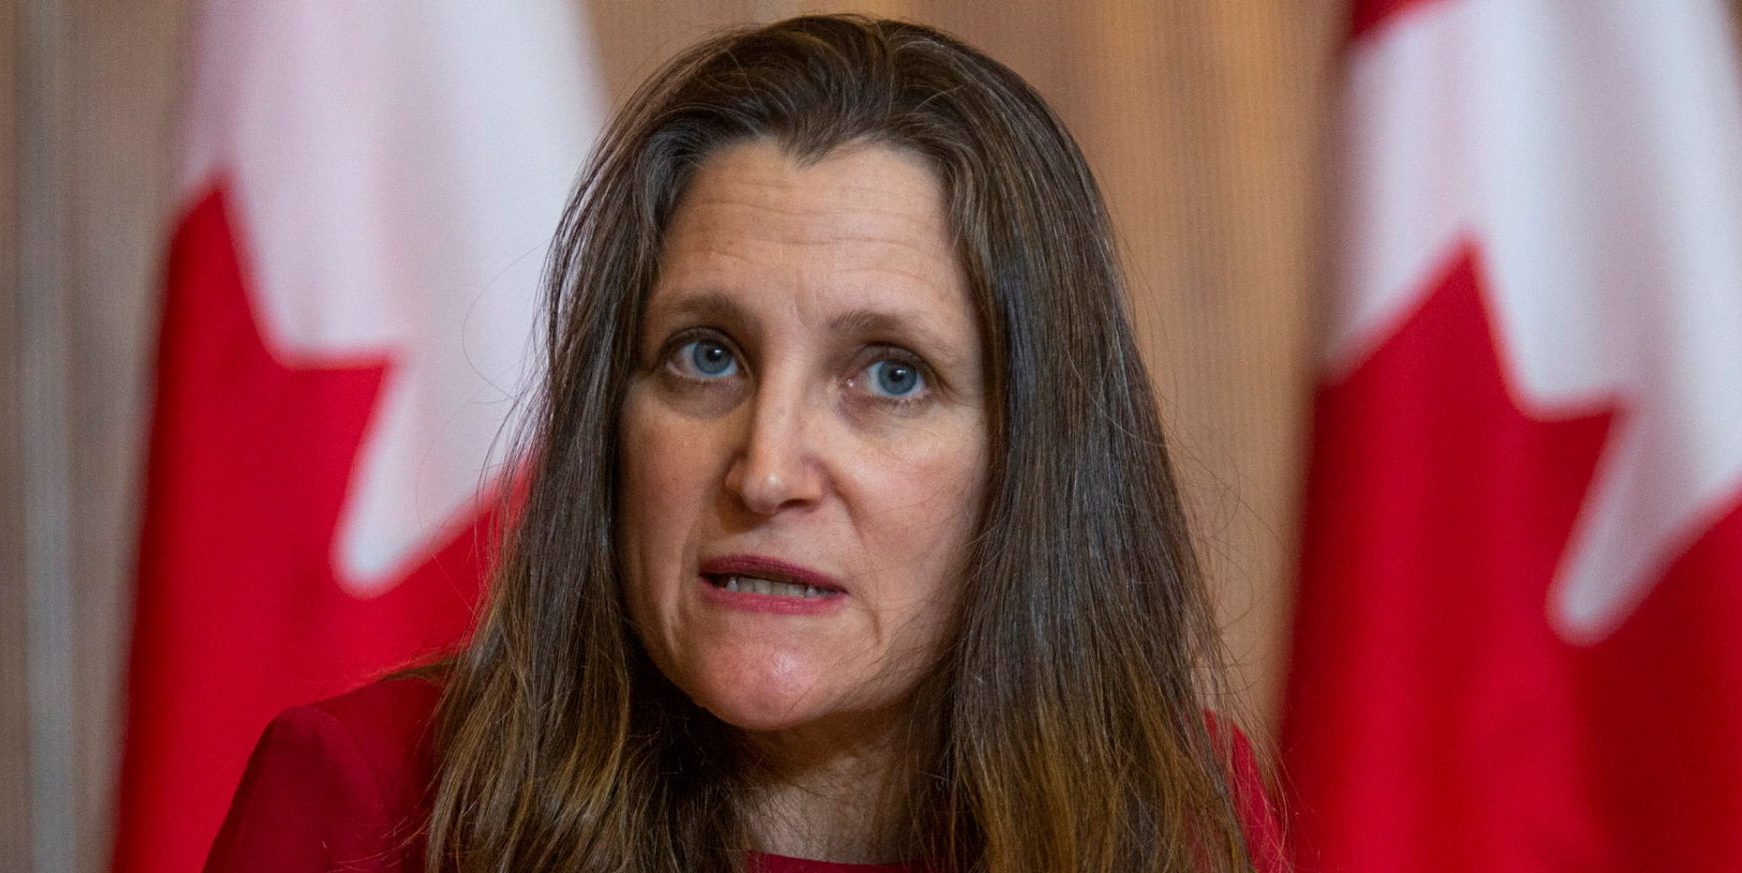 Deputy Prime Minister Chrystia Freeland speaks with reporters during a press conference at the Sir John A. Macdonald building on Feb. 23, 2022 to announce the revocation of the Emergencies Act brought forward in response to nation-wide blockades and anti-mandate protests stemming from the Freedom Convoy. The Hill Times photograph by Andrew Meade